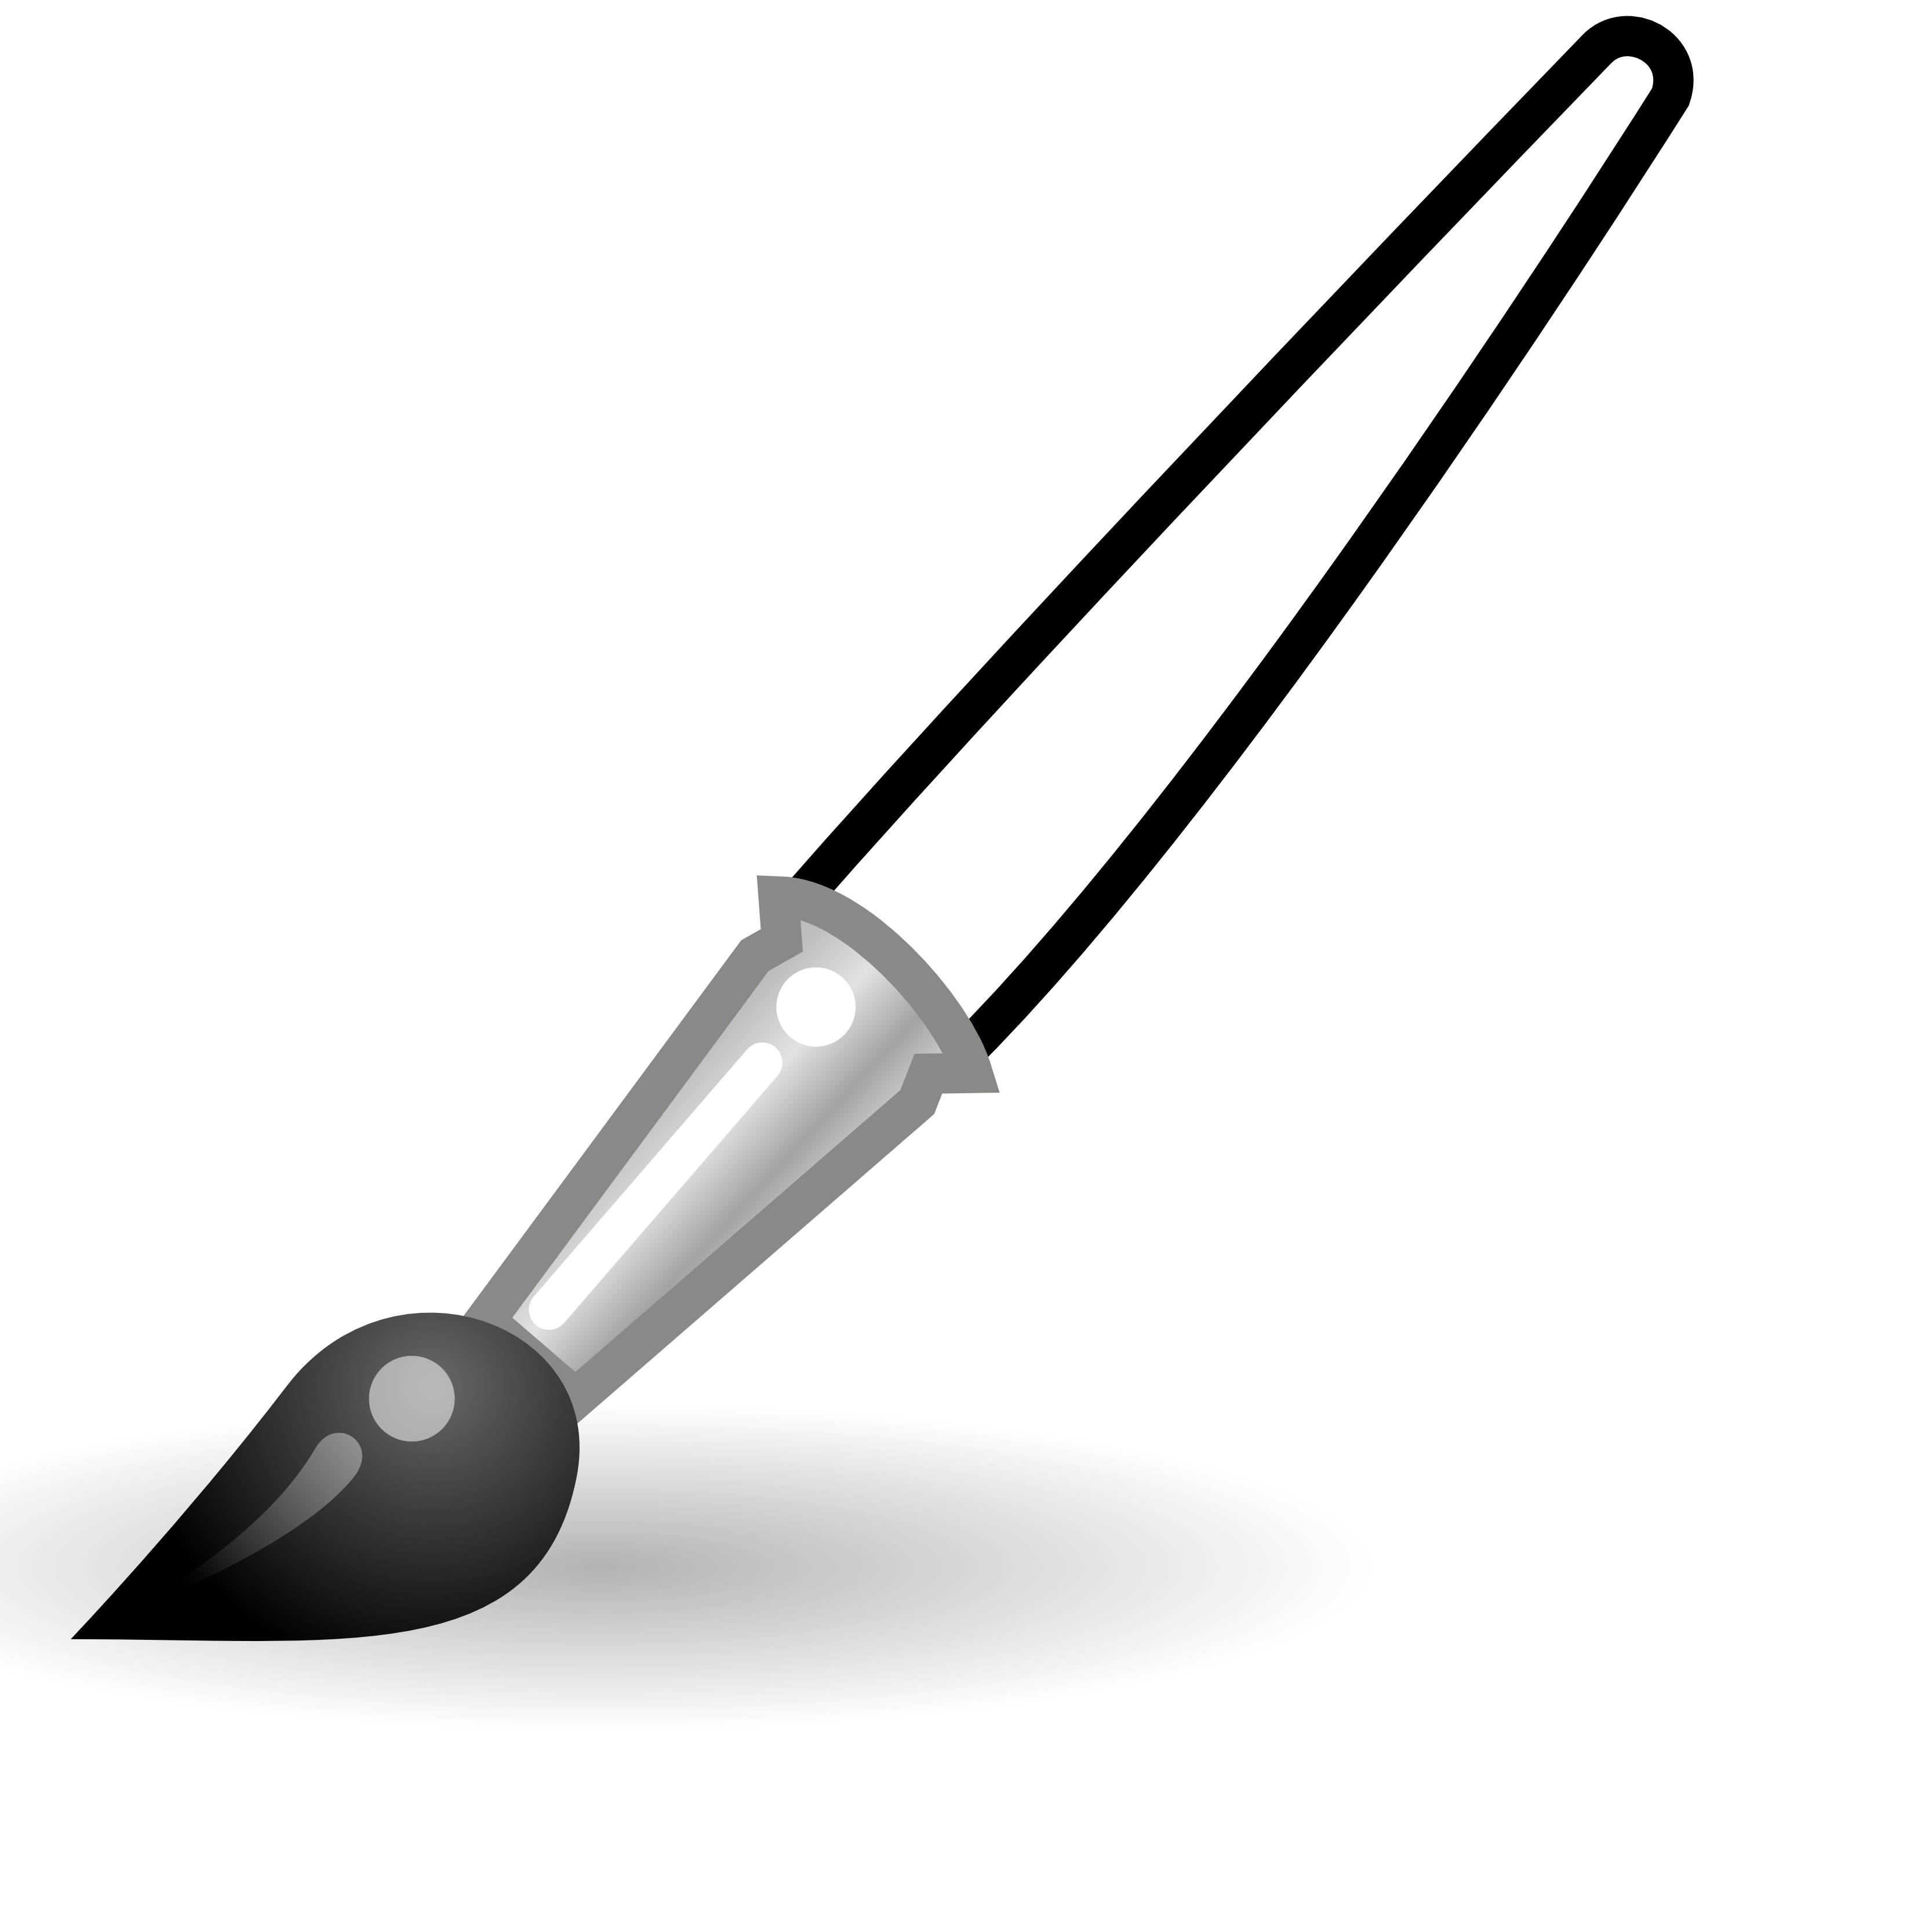 Paint Brush Black And White clipart free image.